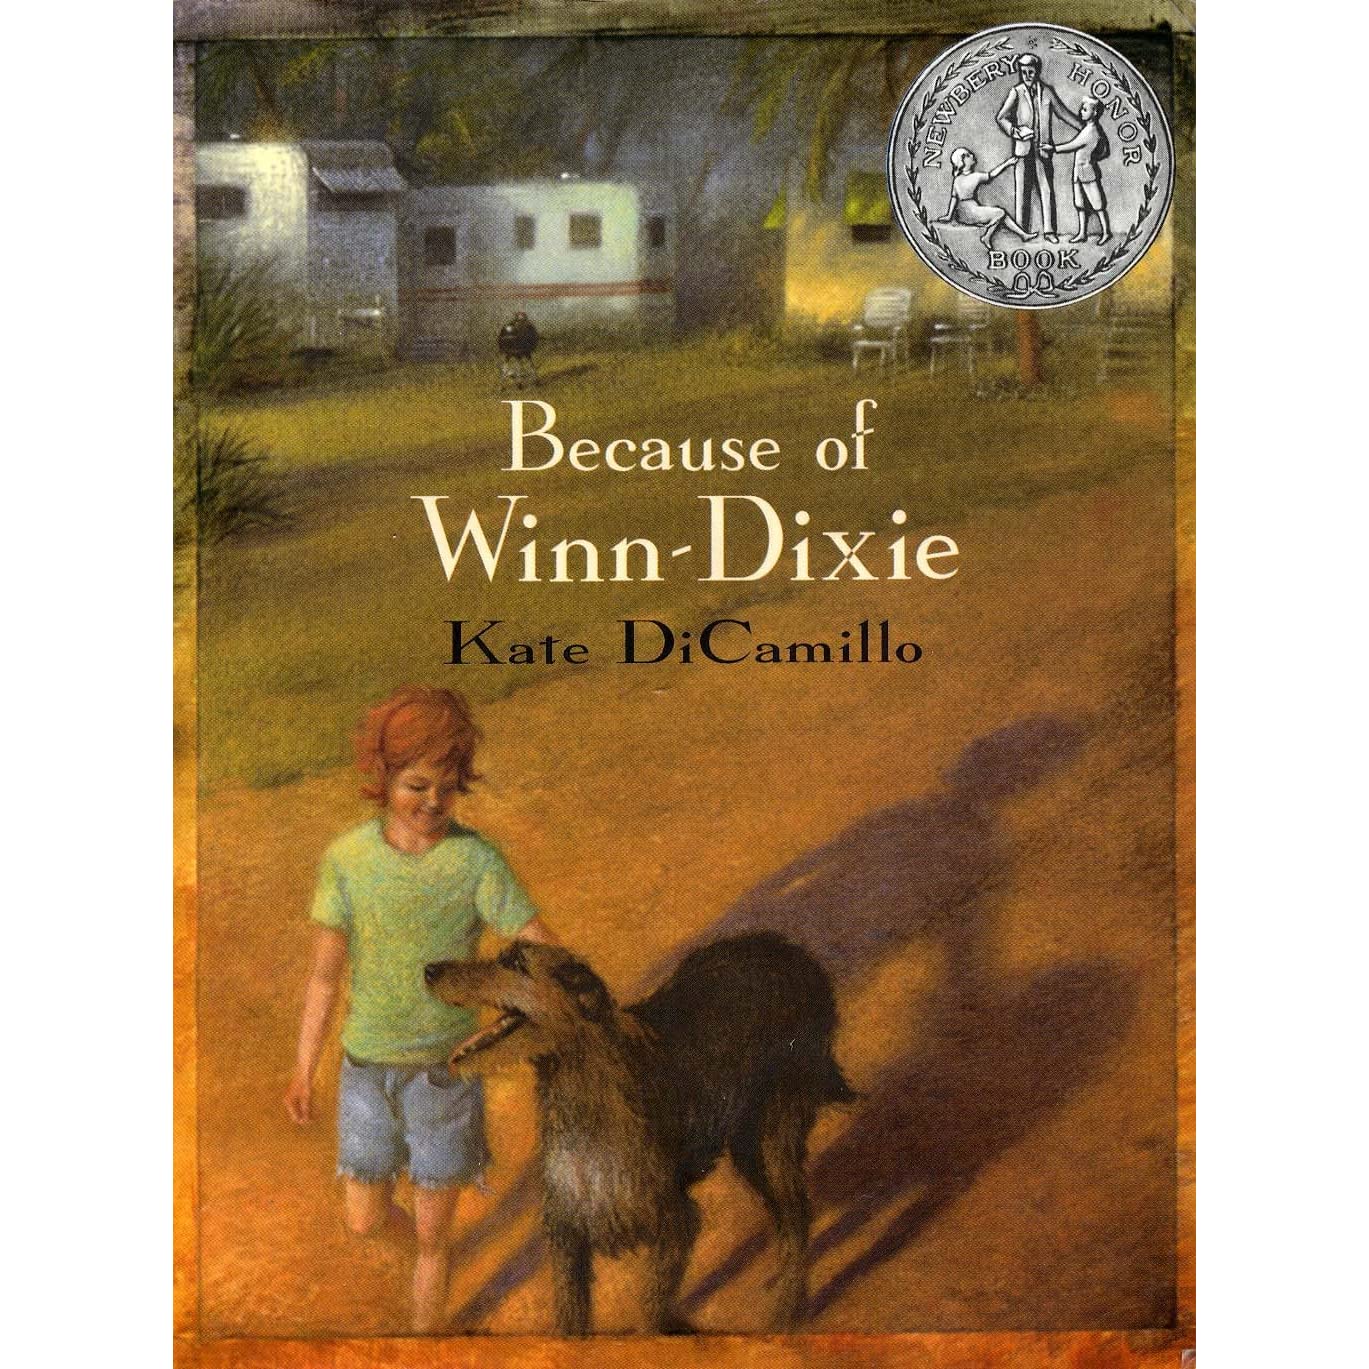 Book cover with a boy and dog